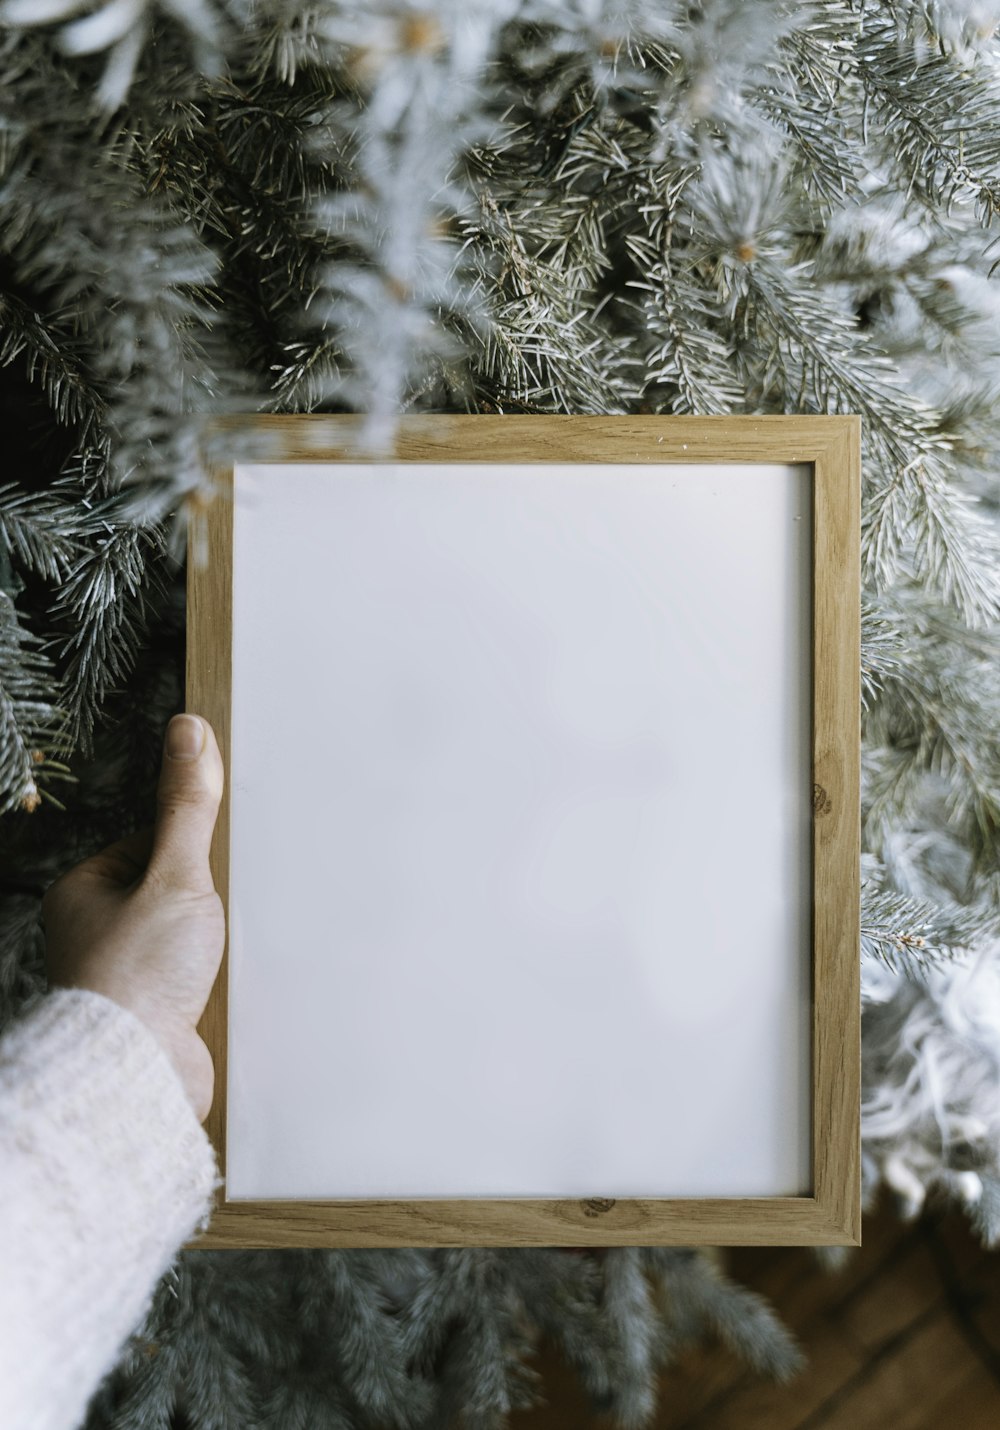 Christmas Frame Pictures | Download Free Images on Unsplash